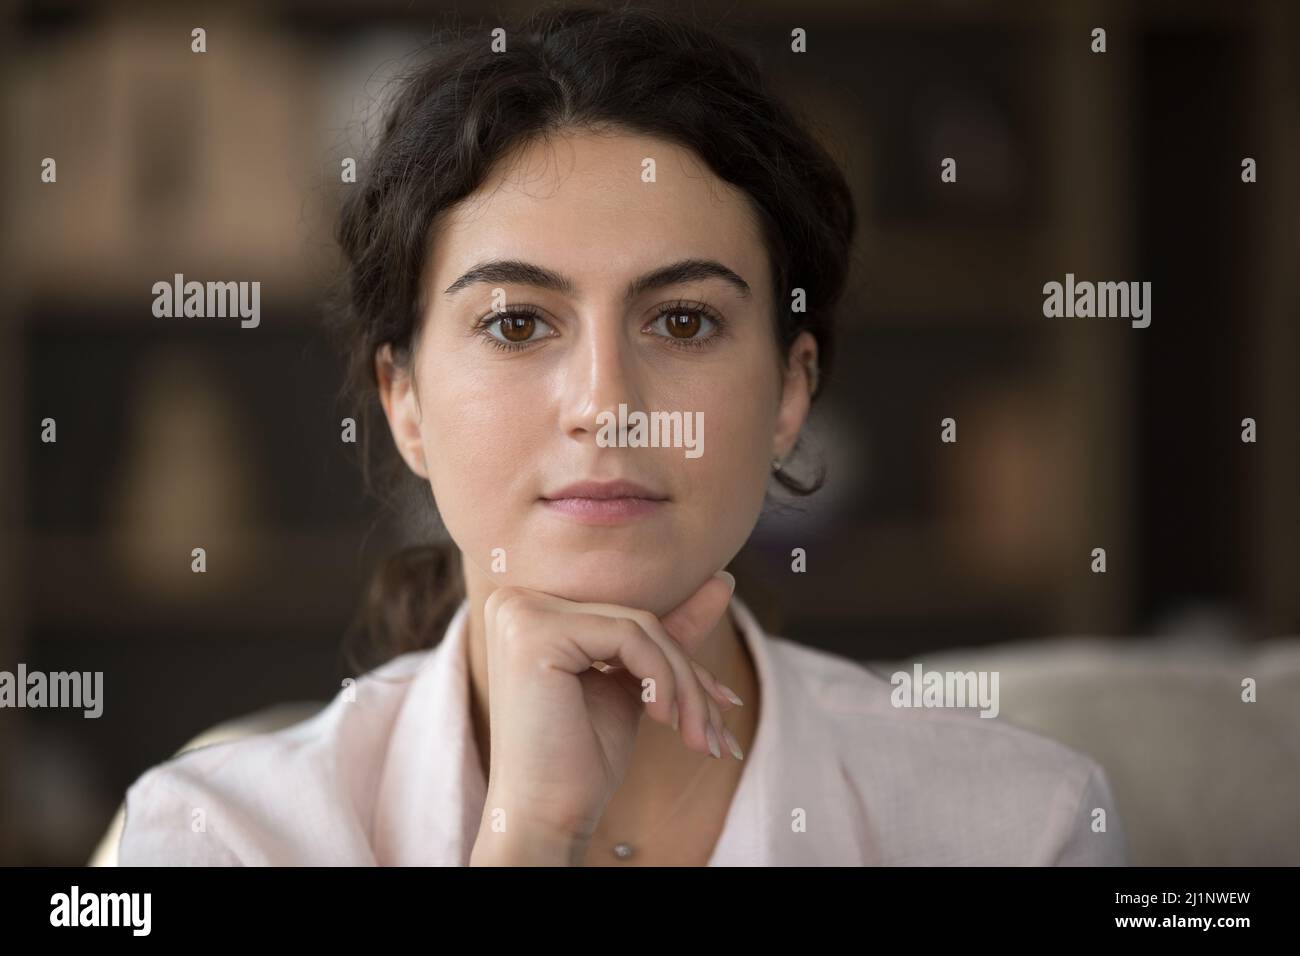 Calm confident young Hispanic girl, millennial woman looking at camera Stock Photo